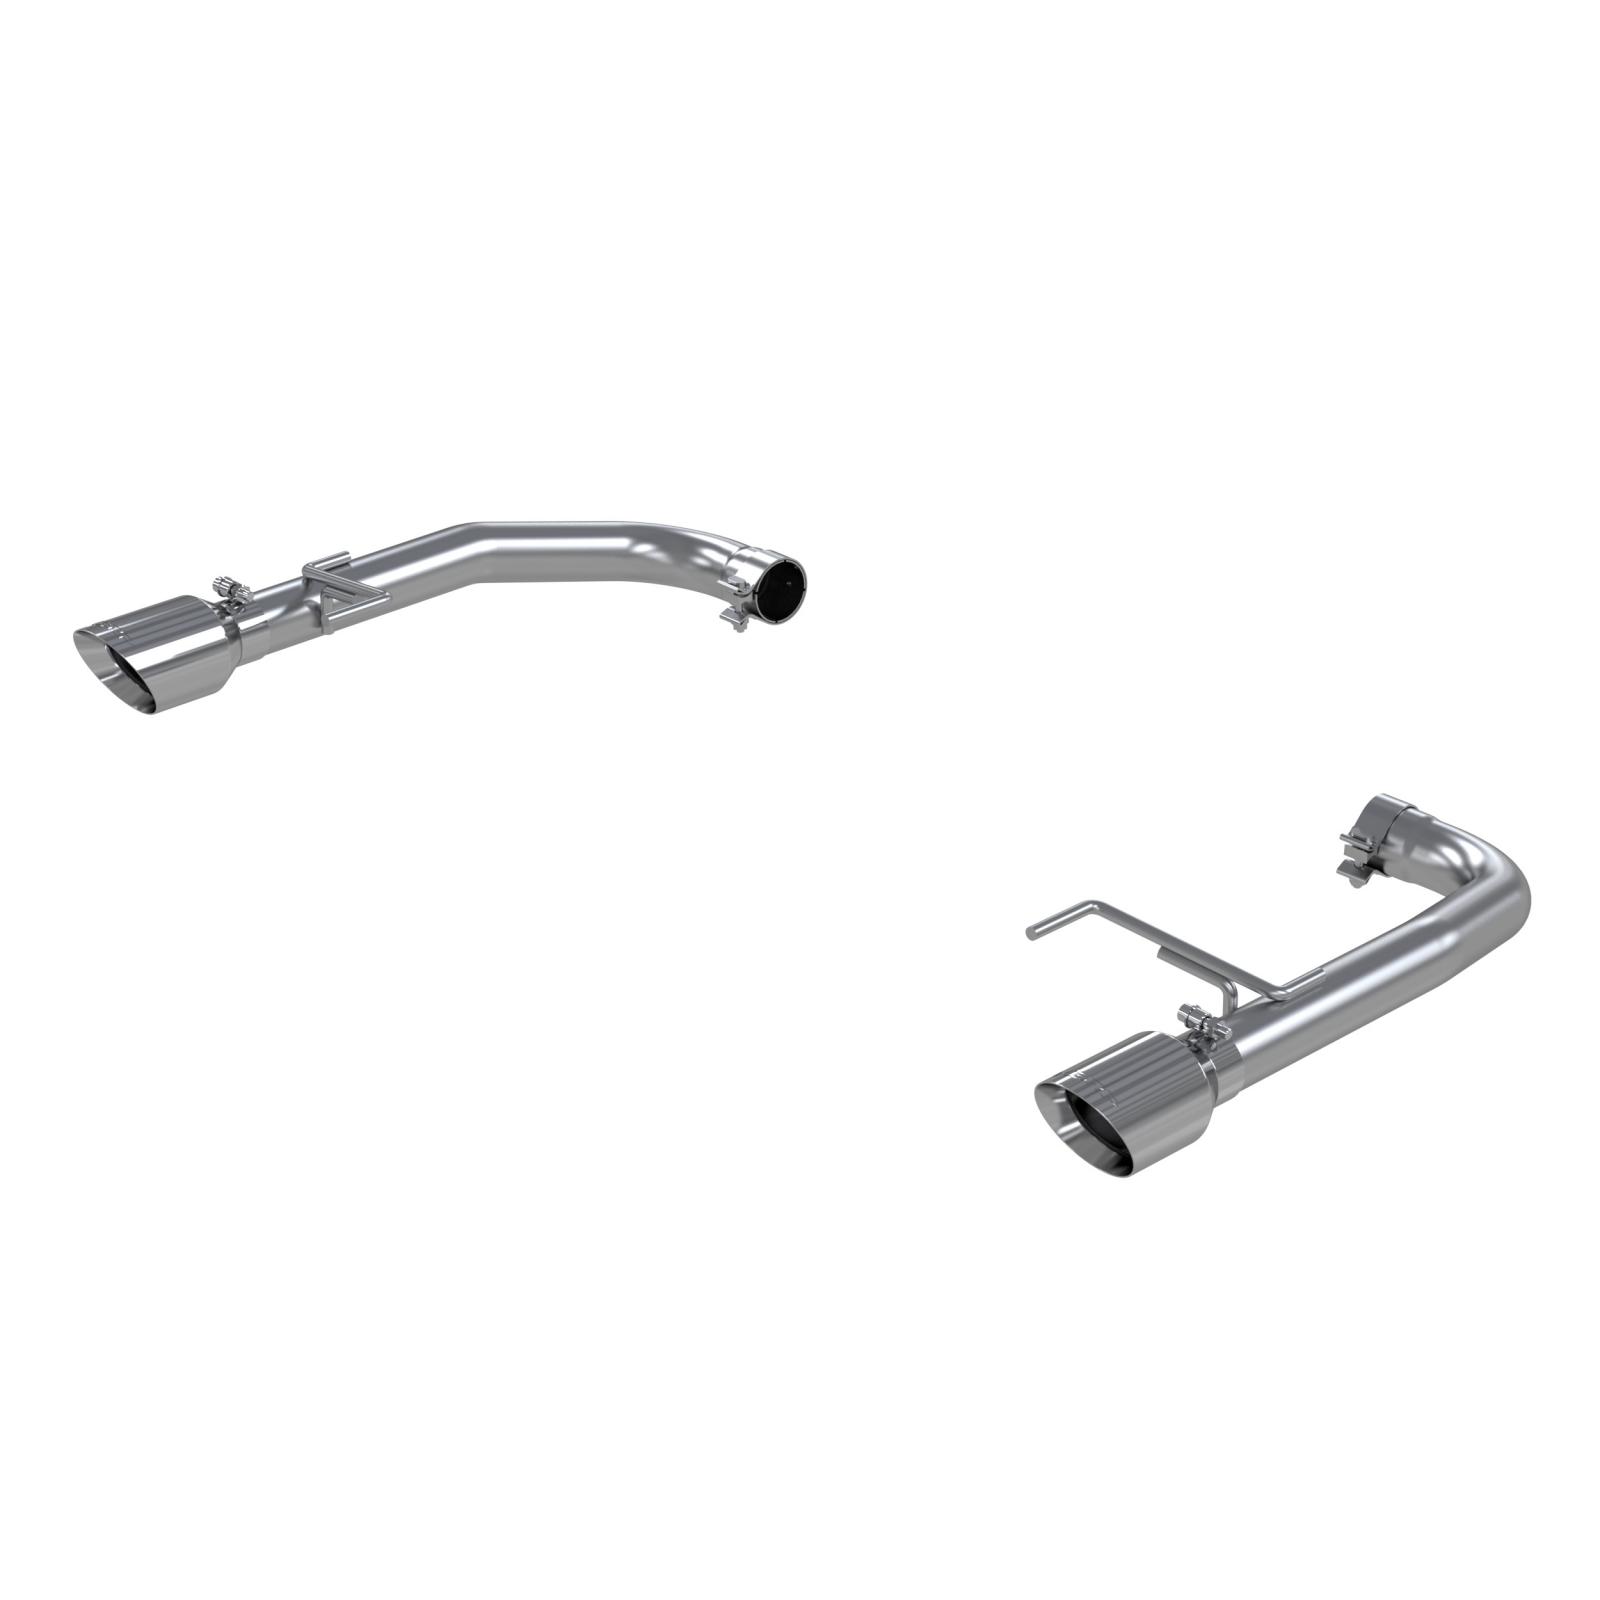 Exhaust Pipe 2.5 in Axle Back Kit T304 Stainless Steel For 15-17 Mustang GT 5.0L